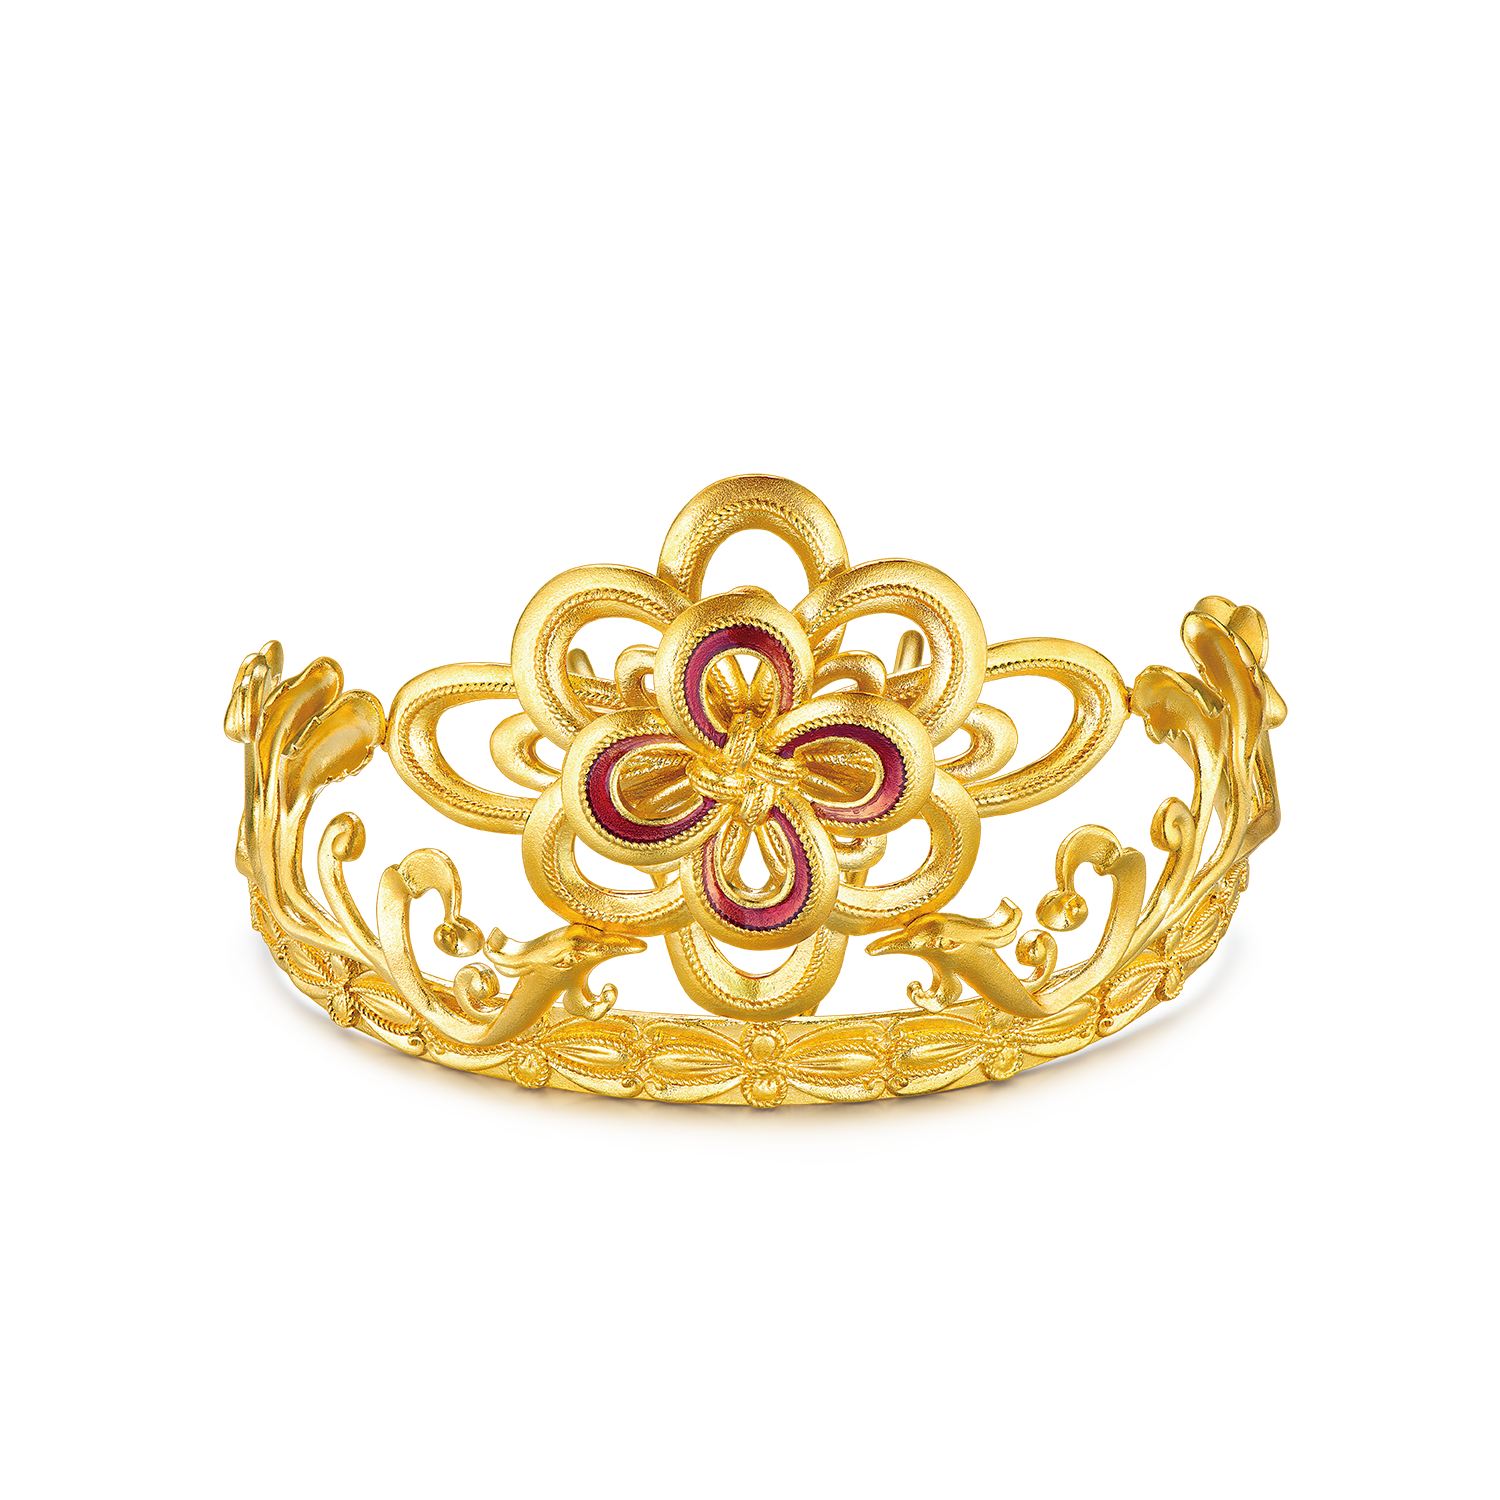 Heirloom Fortune Collection " Tie the Knot" Gold Crown 